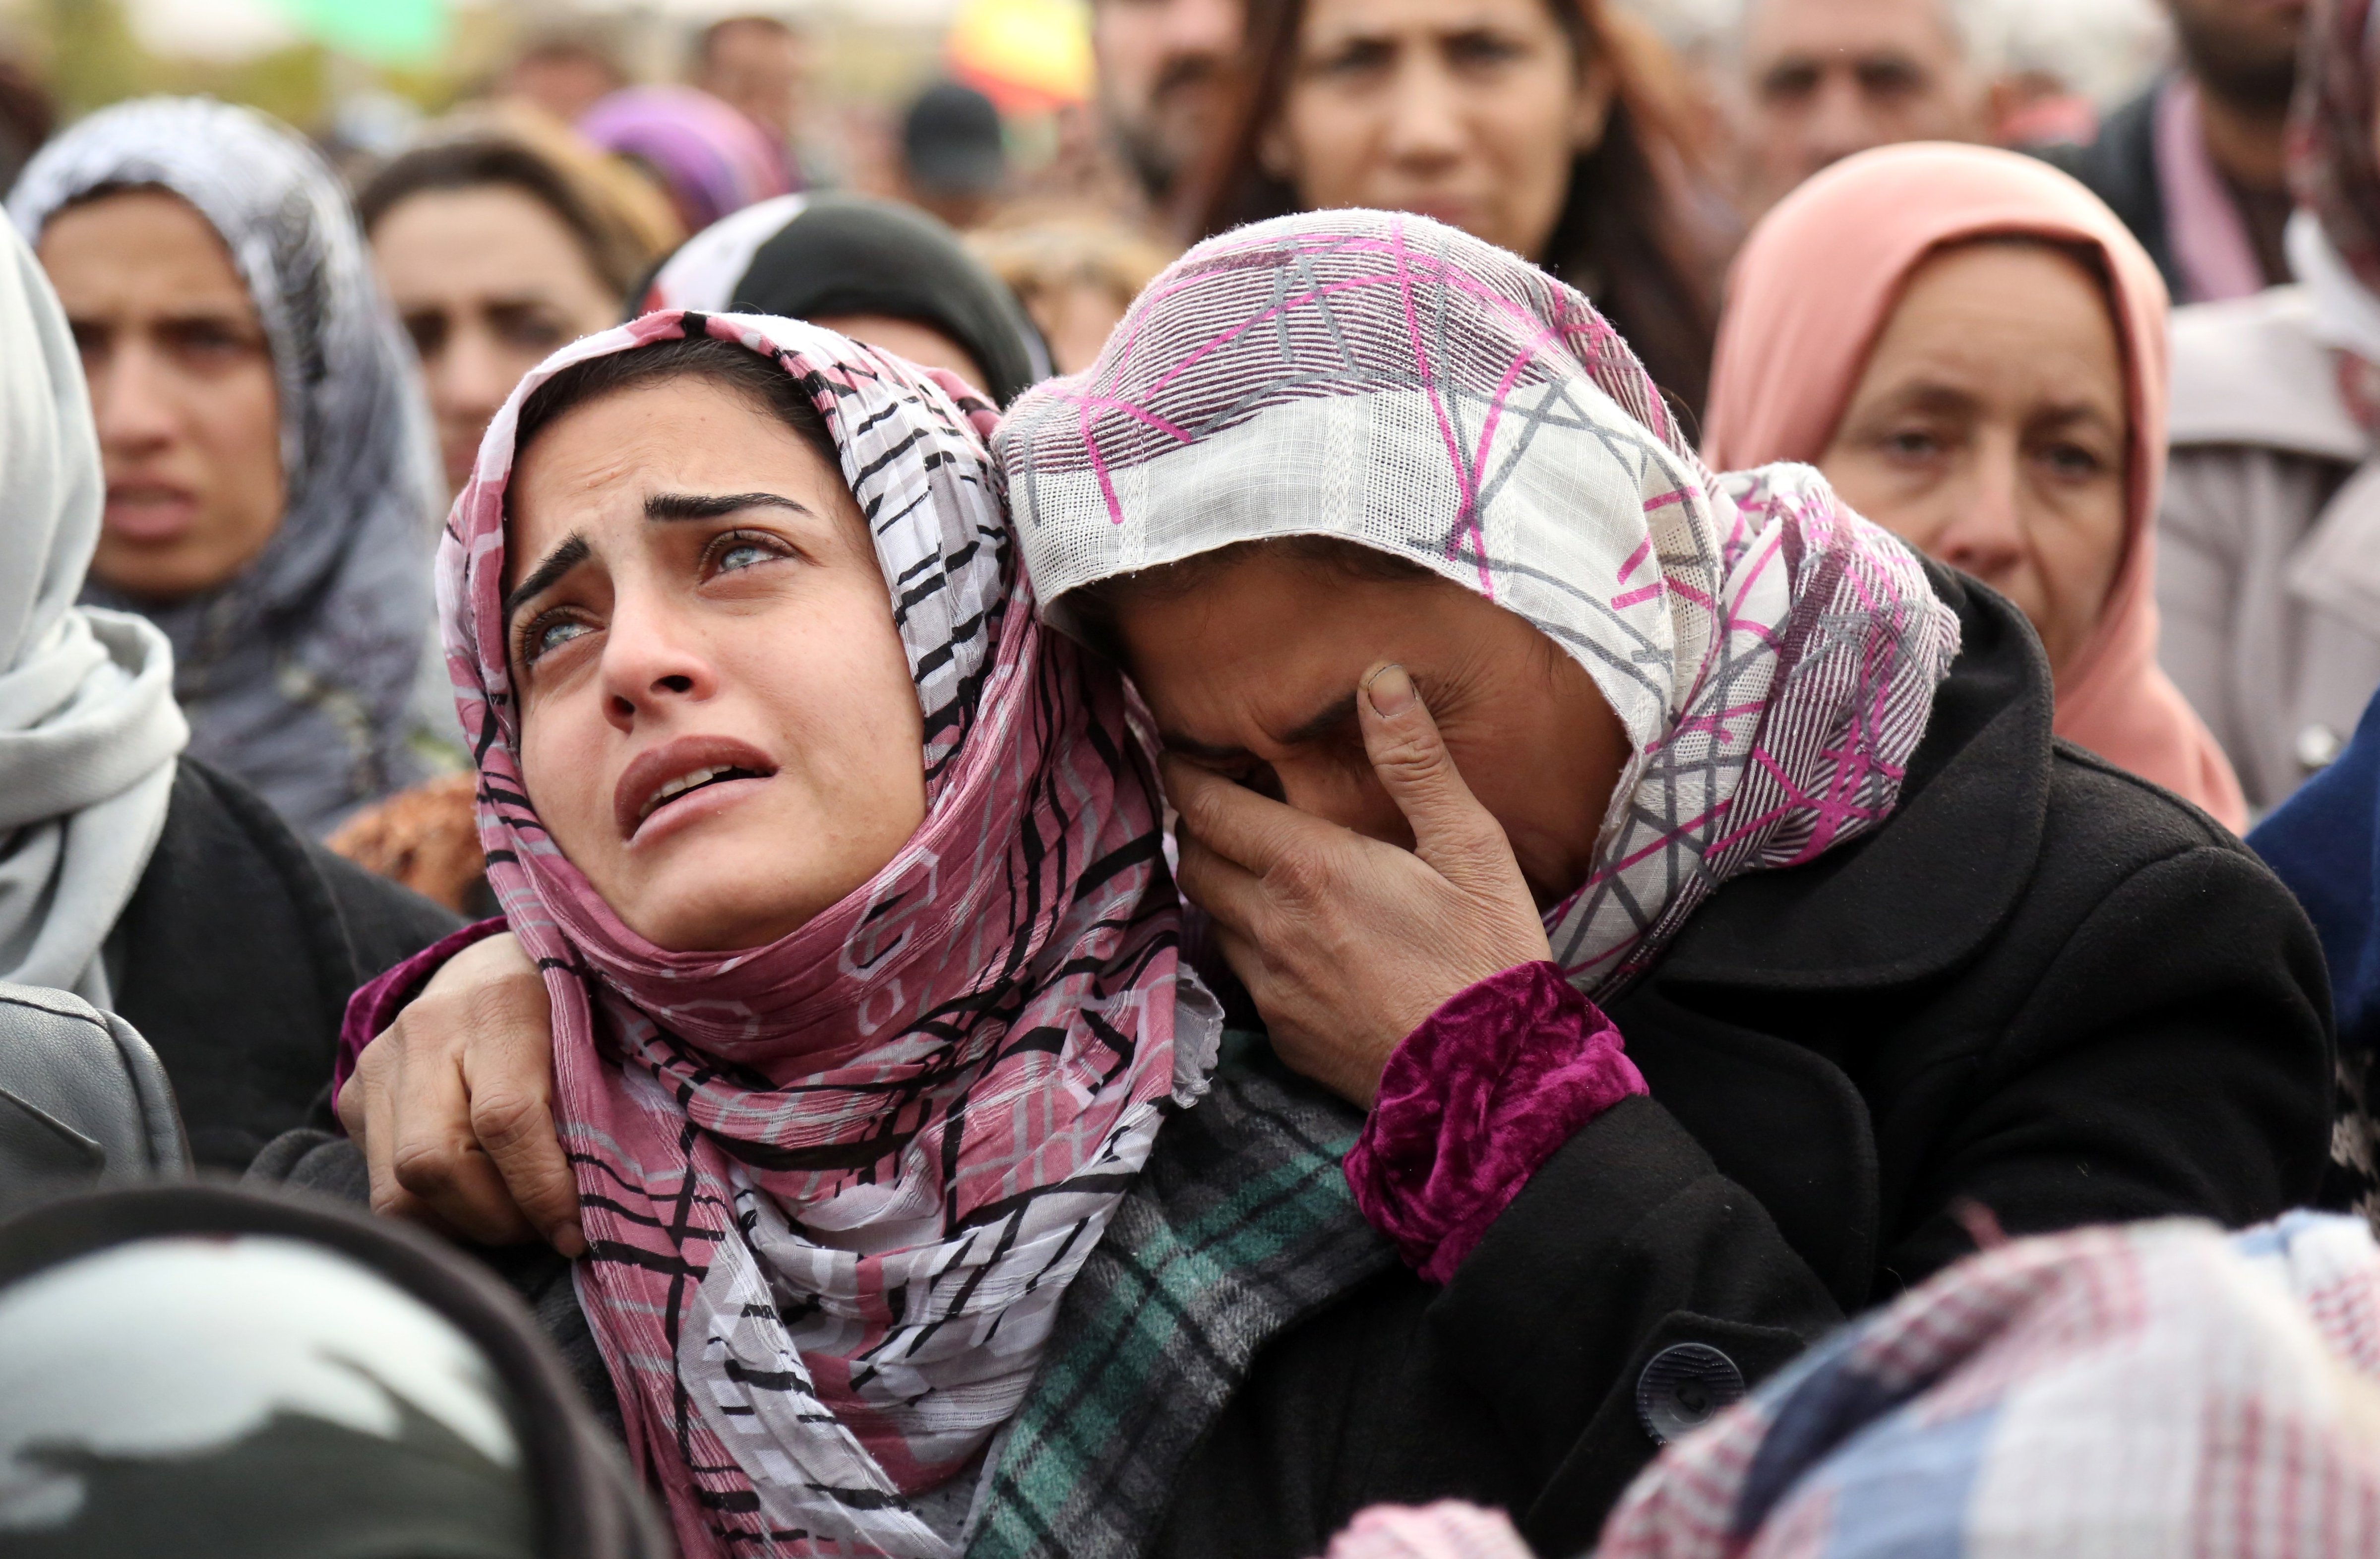 The sister, left, of Mohammed Ismael, who died in a suicide car bombing claimed by the Islamic State of Iraq and Greater Syria, mourns during his funeral in Syria's Hasakeh province on Dec. 13, 2015 (Delil Souleiman—Getty Images)